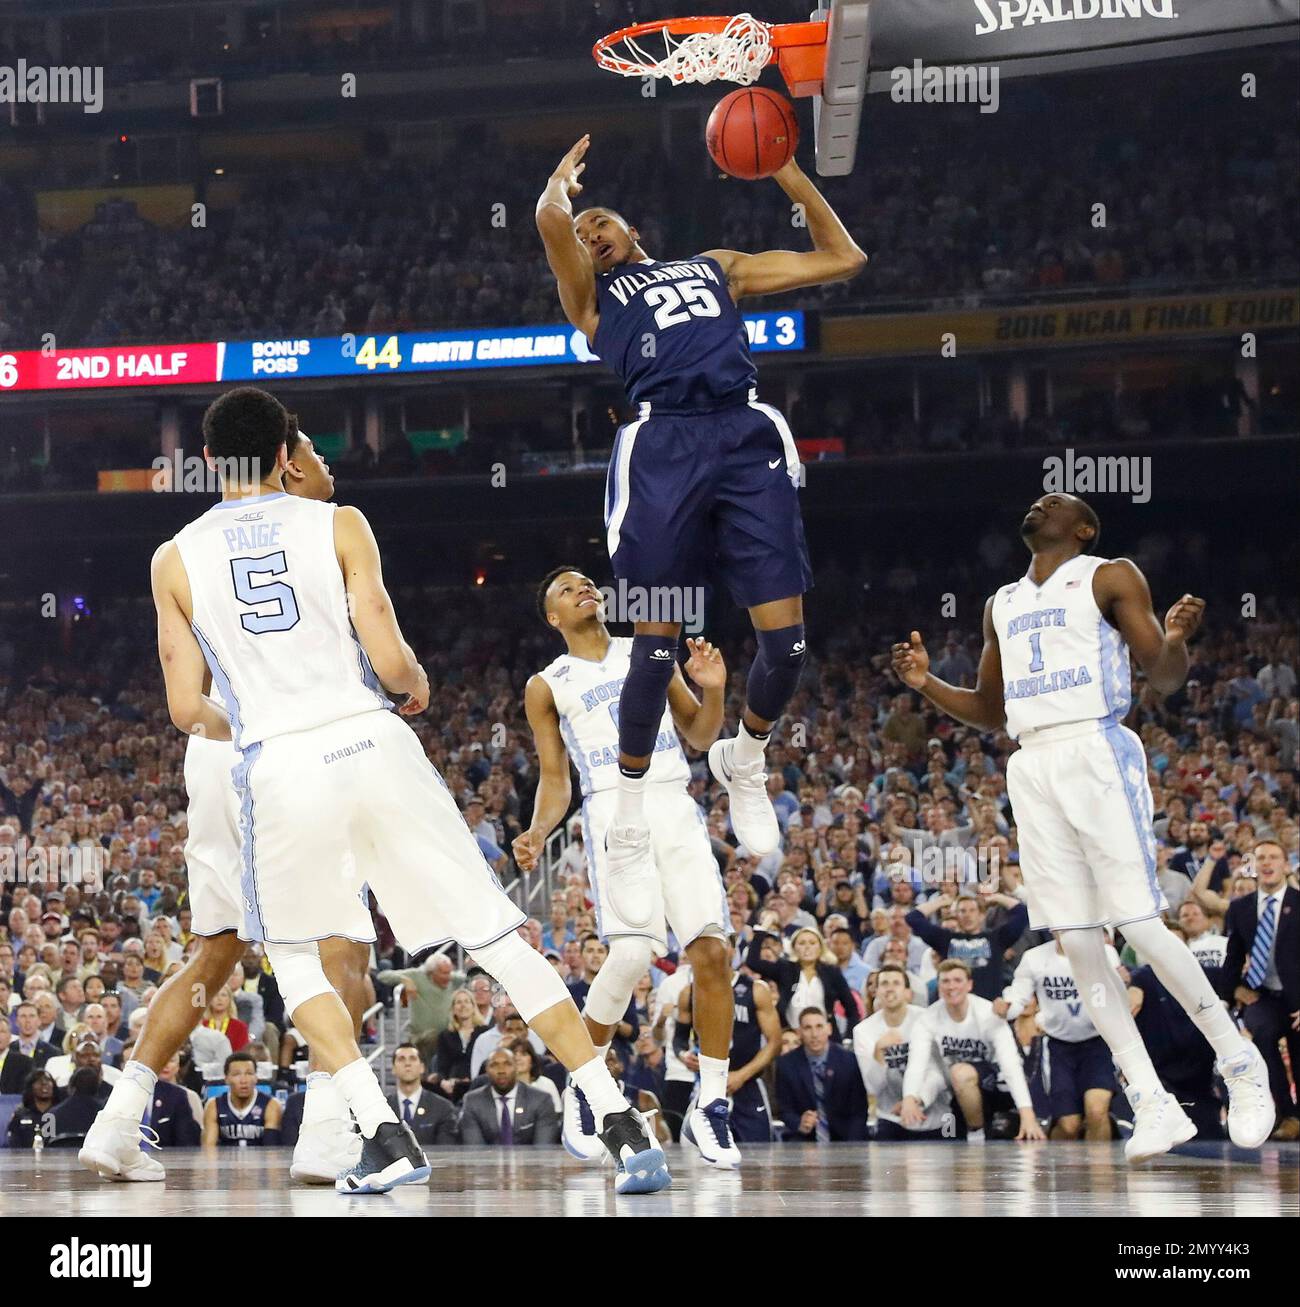 Villanova guard Mikal Bridges (25) moves after a shot against North Carolina during the second half of the NCAA Final Four tournament college basketball championship game Monday, April 4, 2016, in Houston. (AP Photo/Eric Gay) Stock Photo